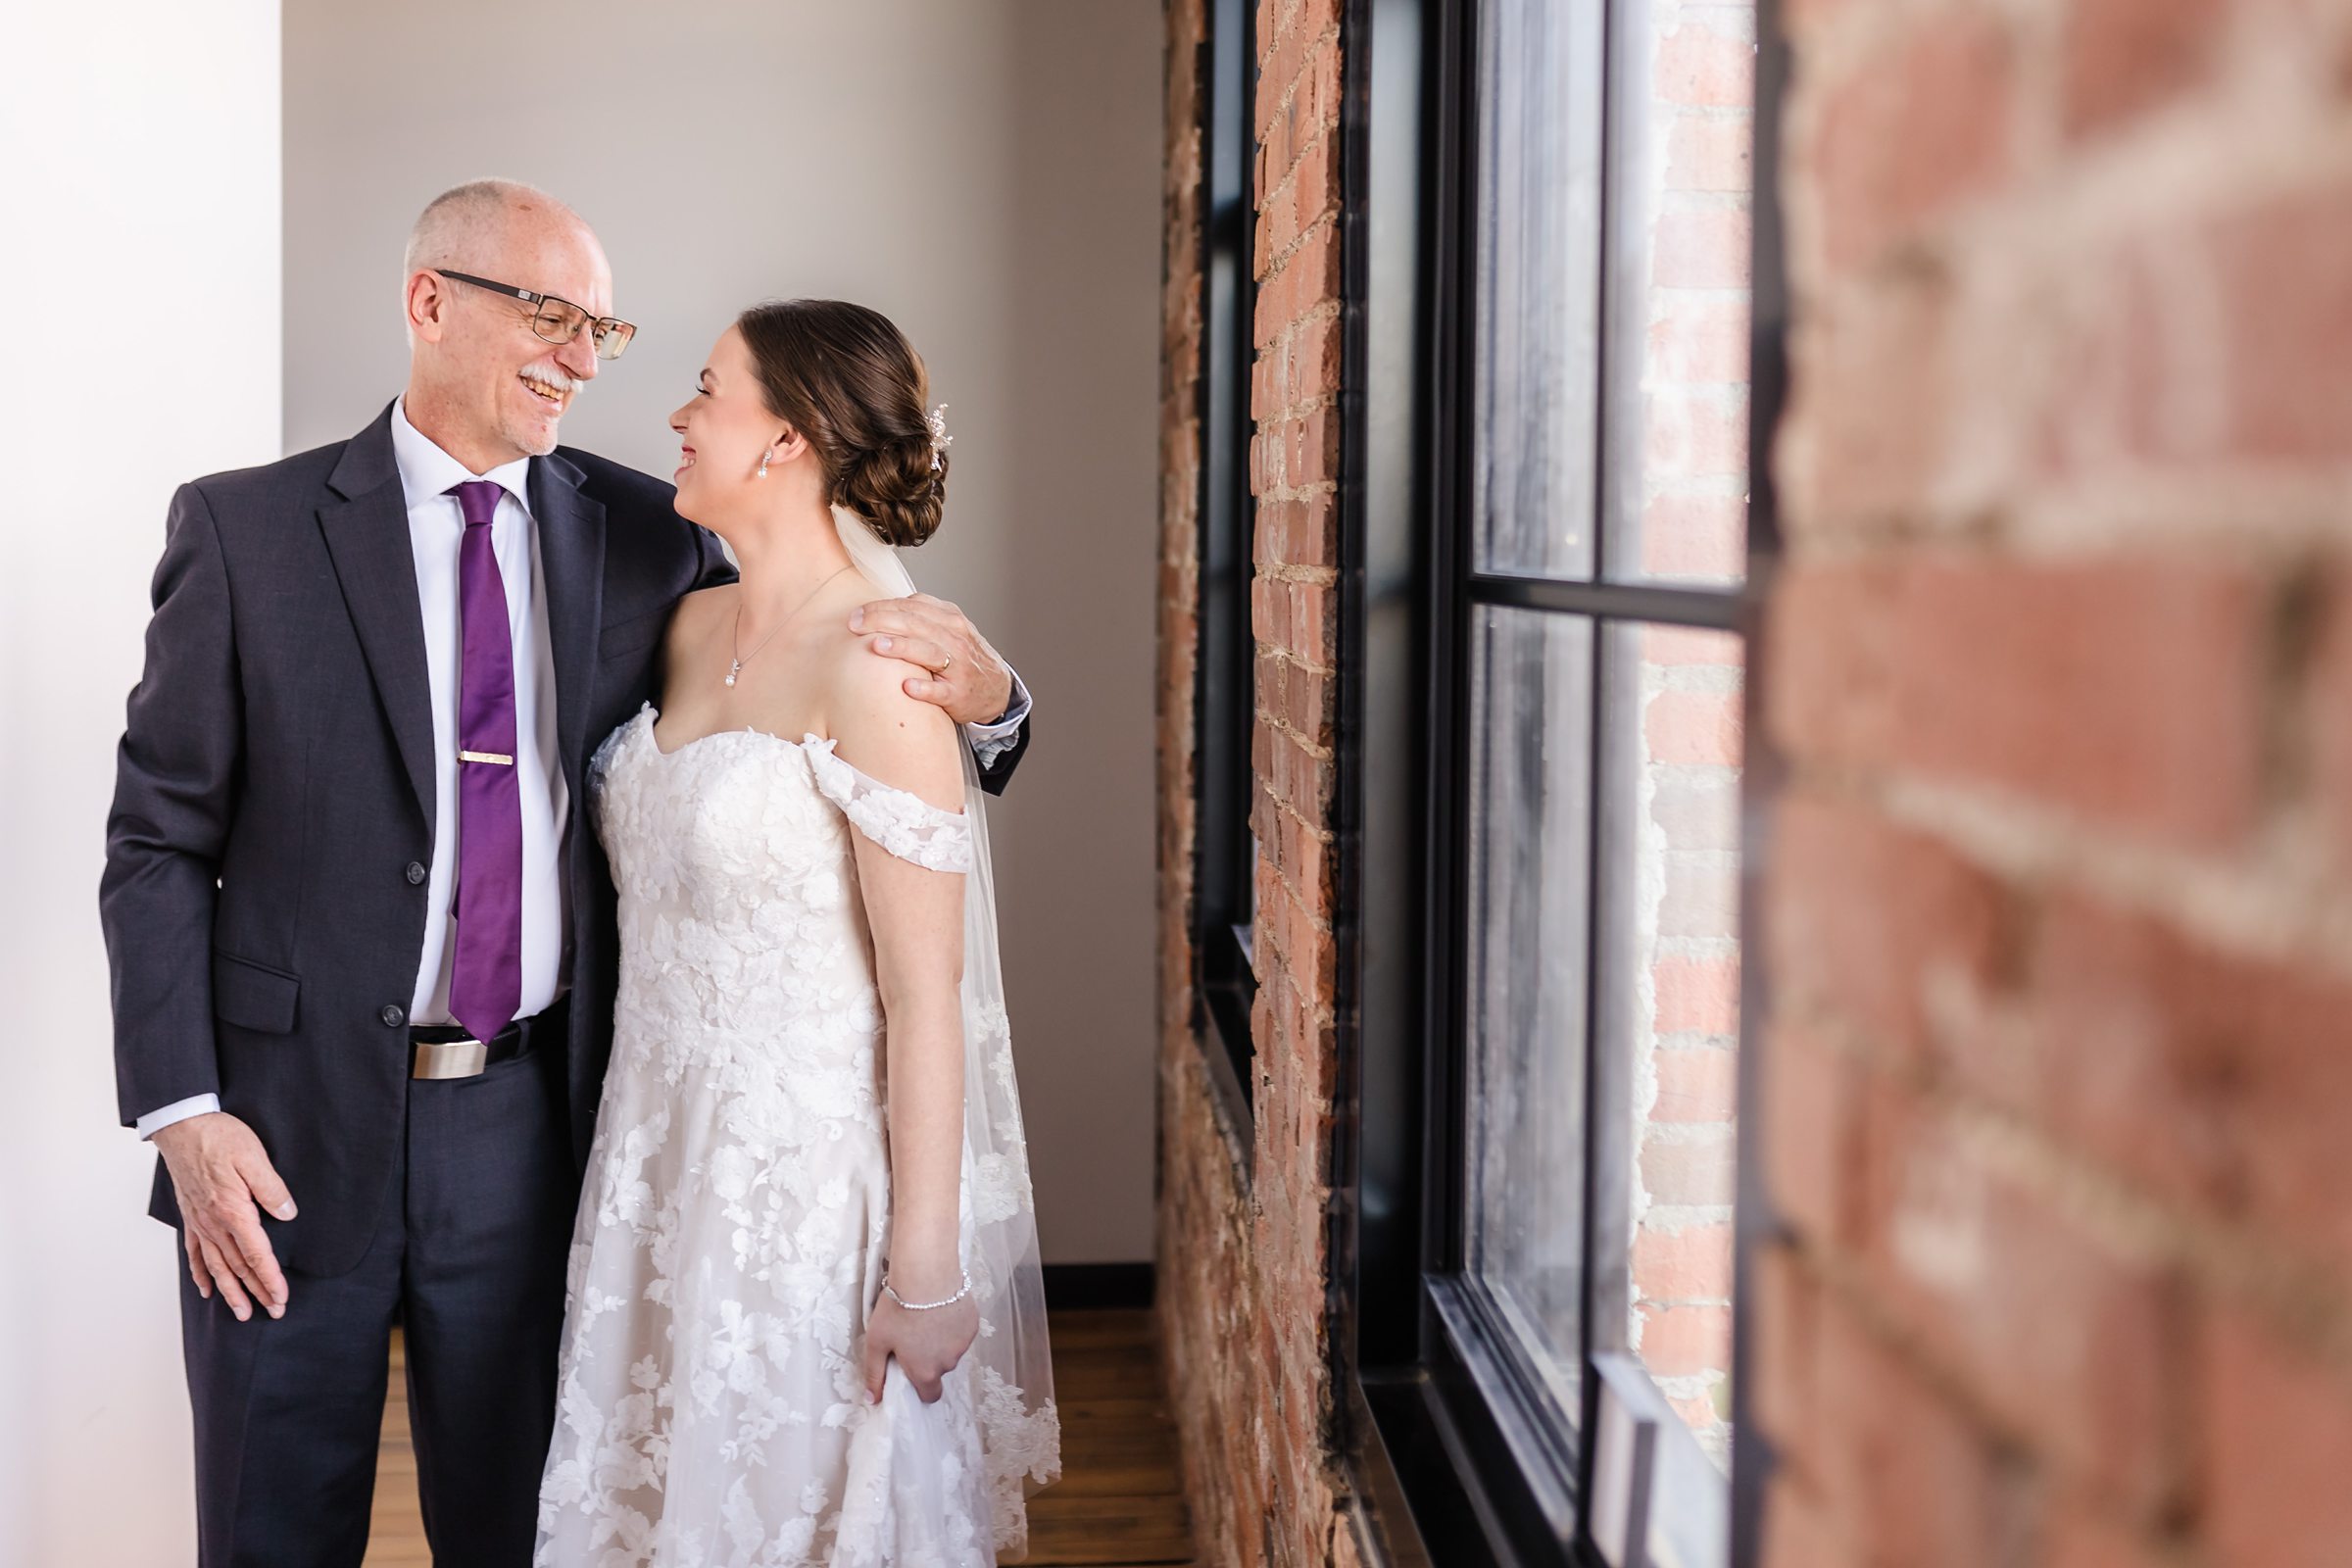 Dad shares a special moment with the bride before her wedding at the Trailside Event Center in Peoria Heights, Illinois.